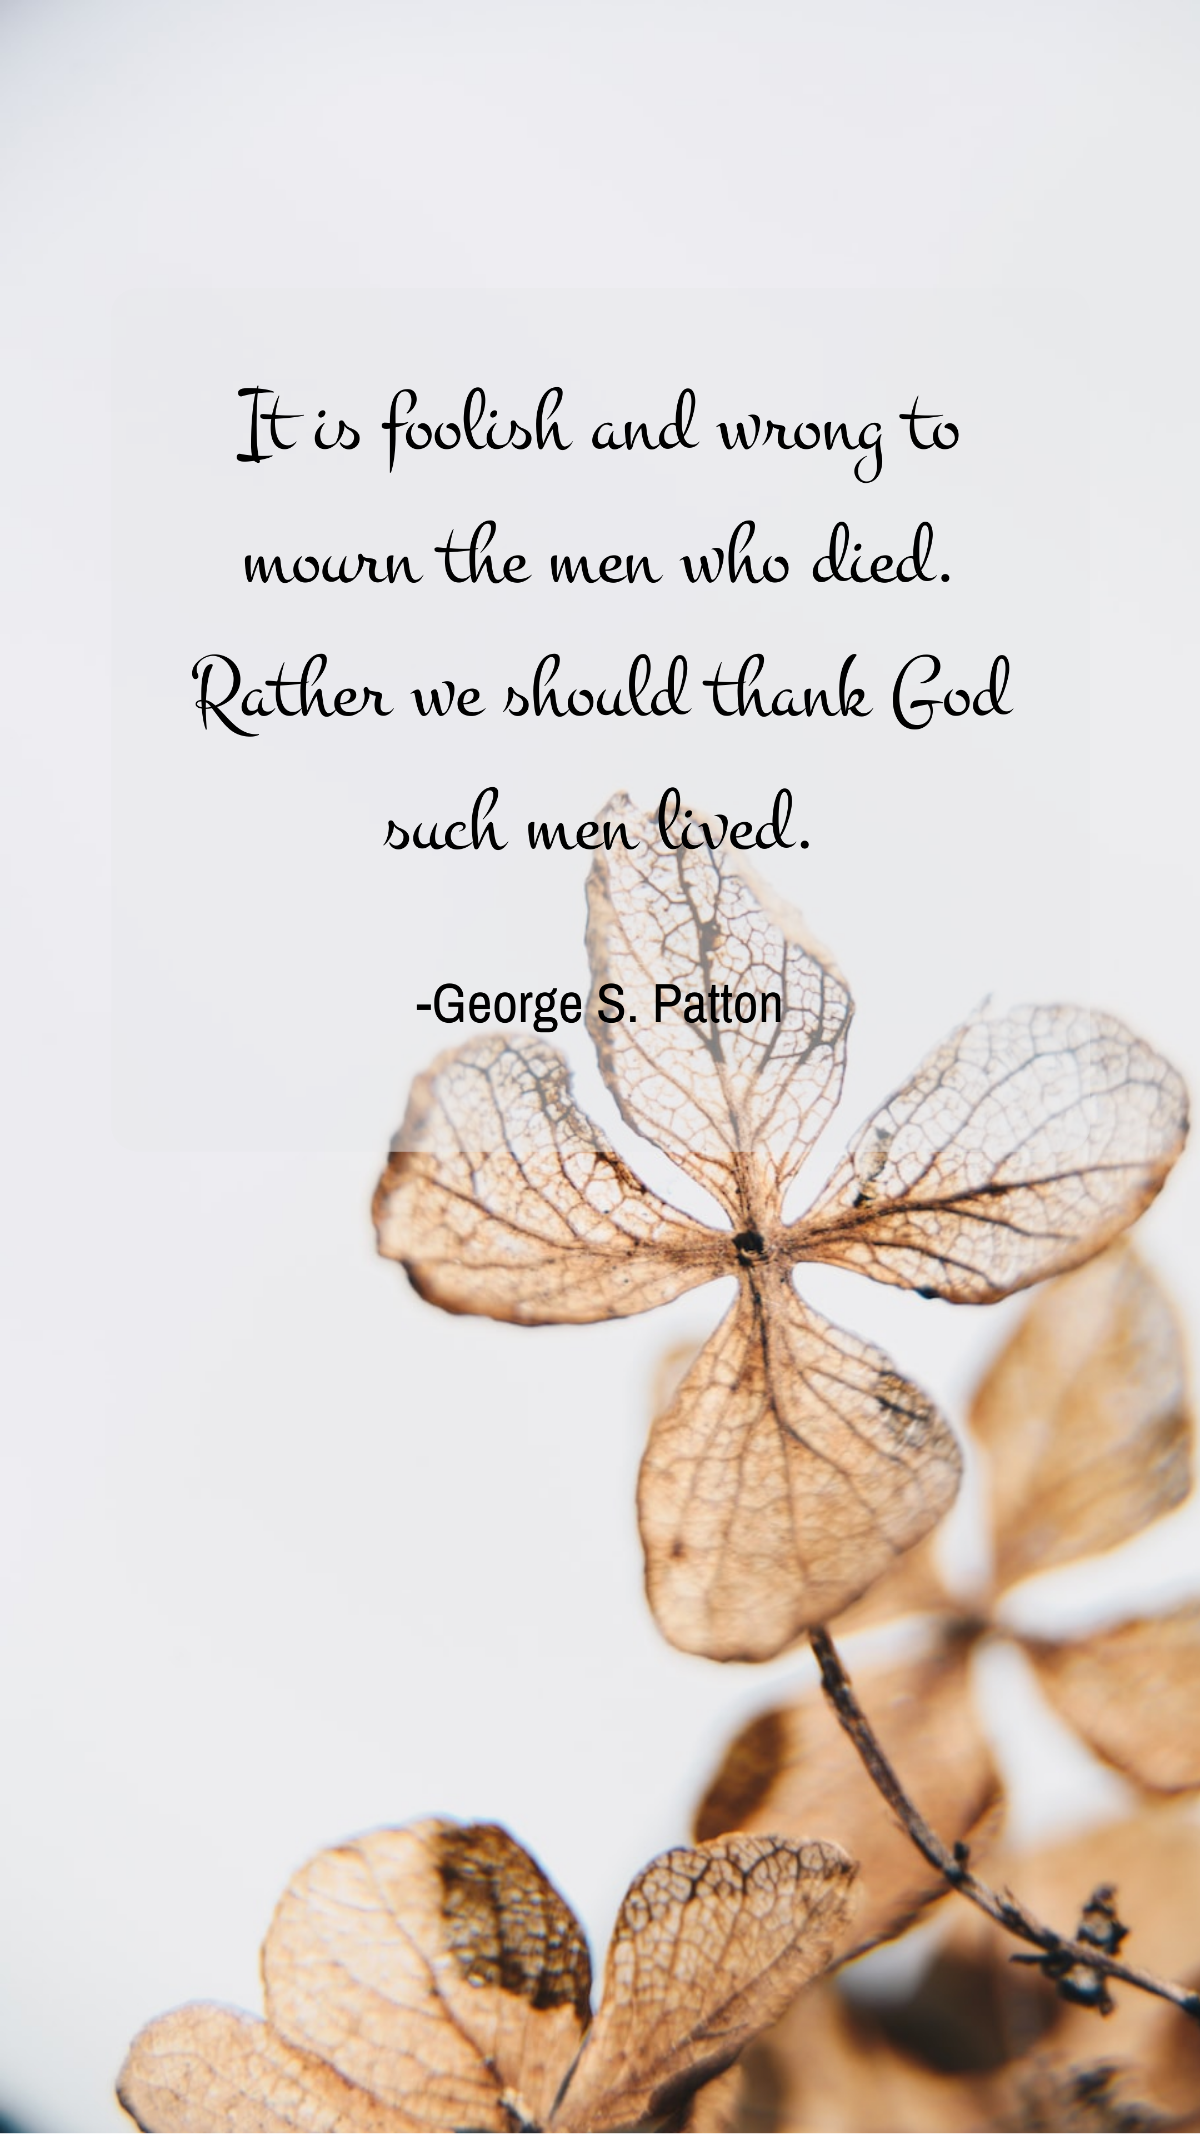 George S. Patton - It is foolish and wrong to mourn the men who died. Rather we should thank God such men lived. Template